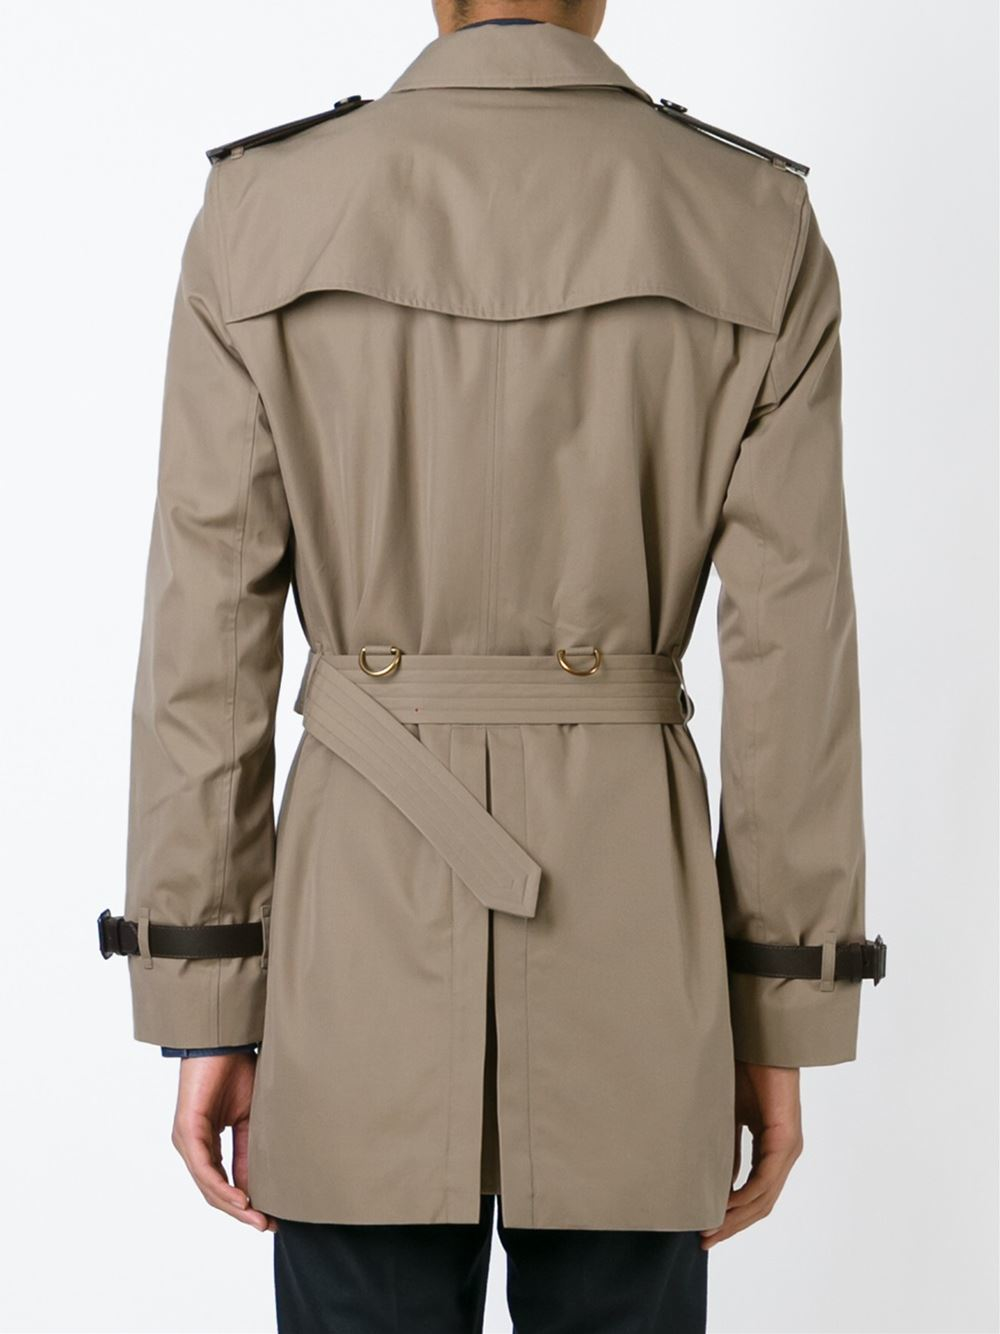 Lyst - Burberry Classic Trench Coat in Brown for Men